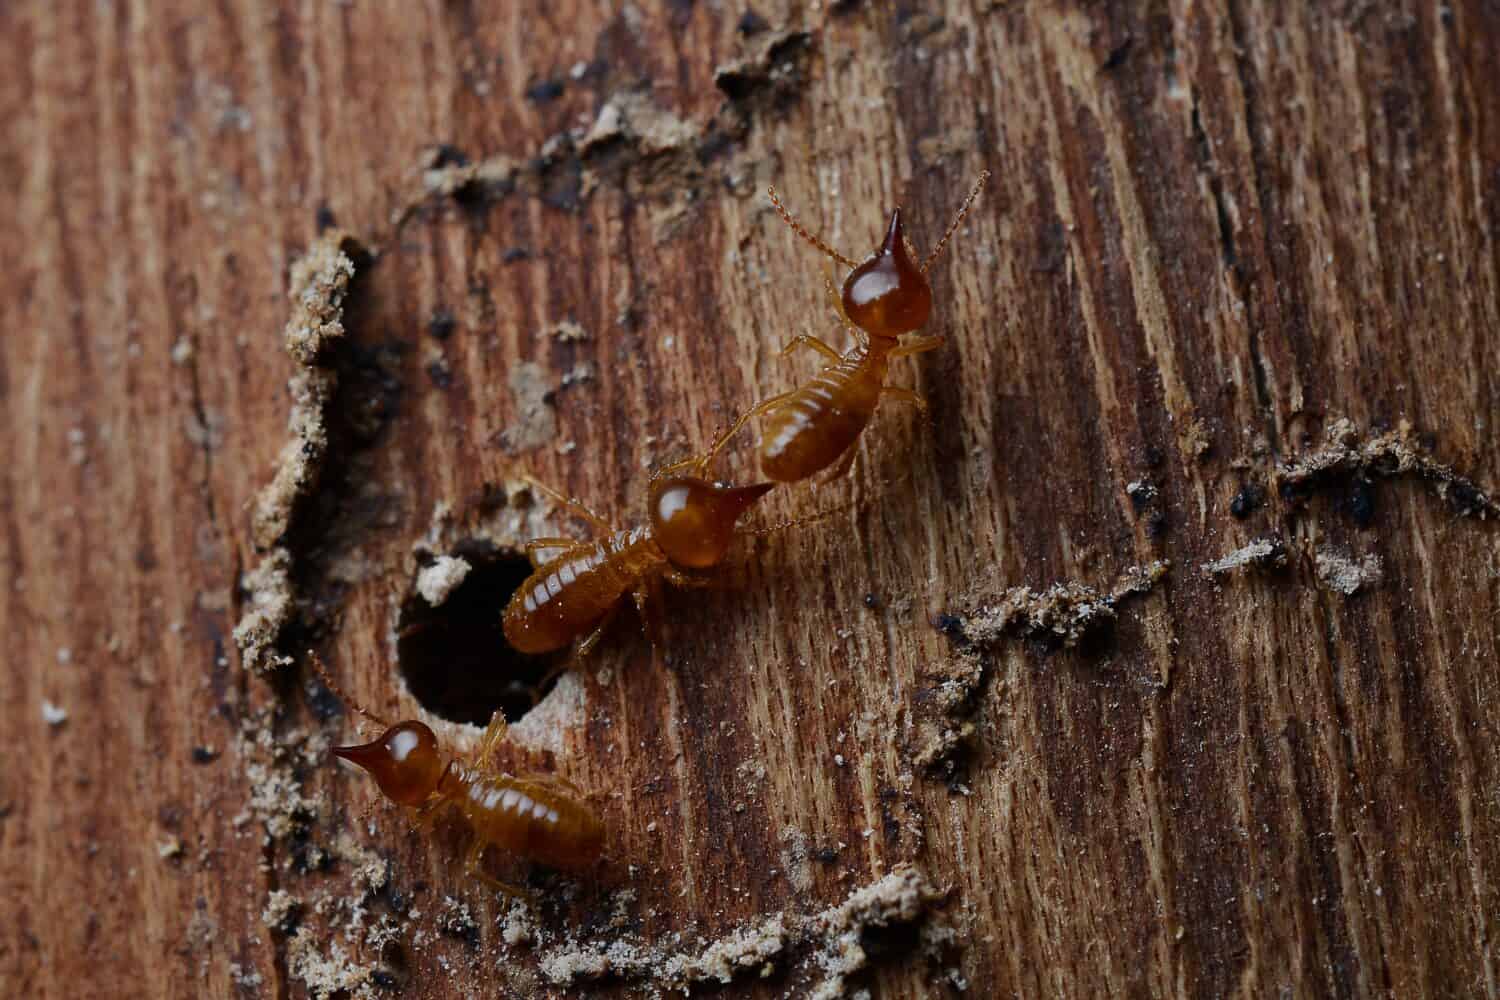 Termites are pests that destroy wooden materials by gnawing at them and causing the entire house to collapse.